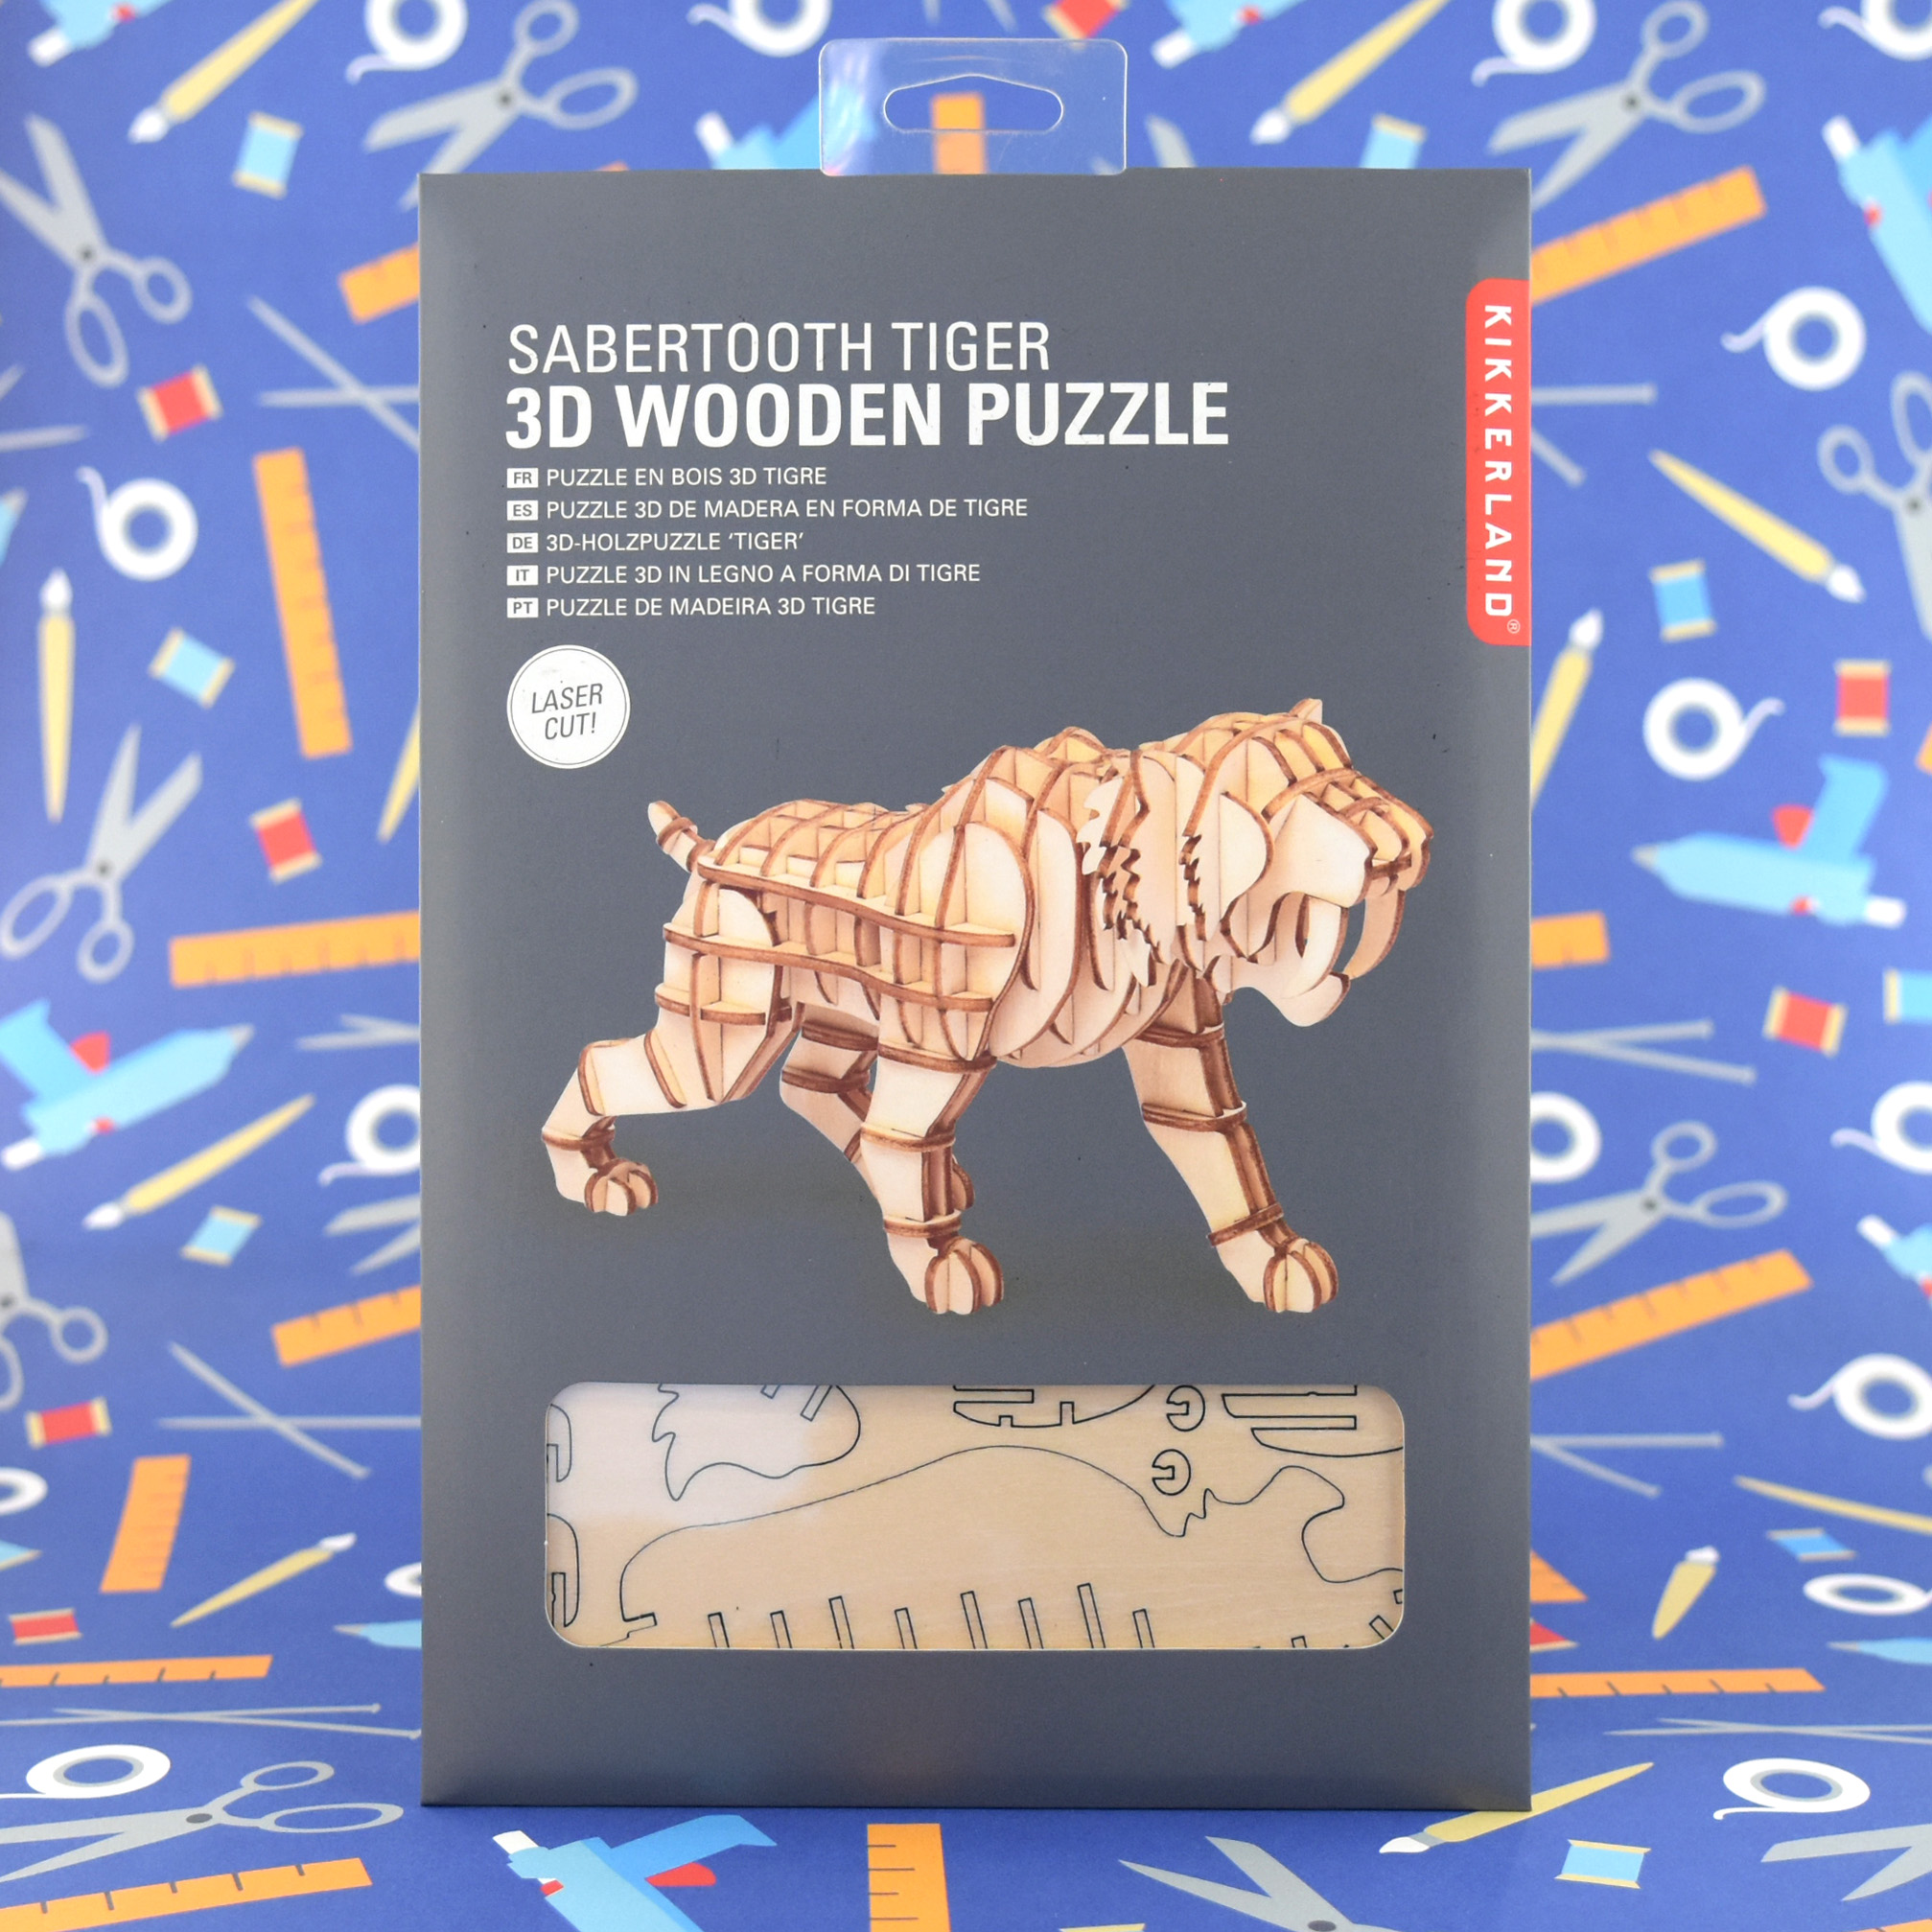 with Unique Shapes for Adults & Kids by WoodGalaxy 31.8 x 53.3 cm Dream Catcher Wooden Jigsaw Puzzle 307 Pieces 12.5 x 21 in